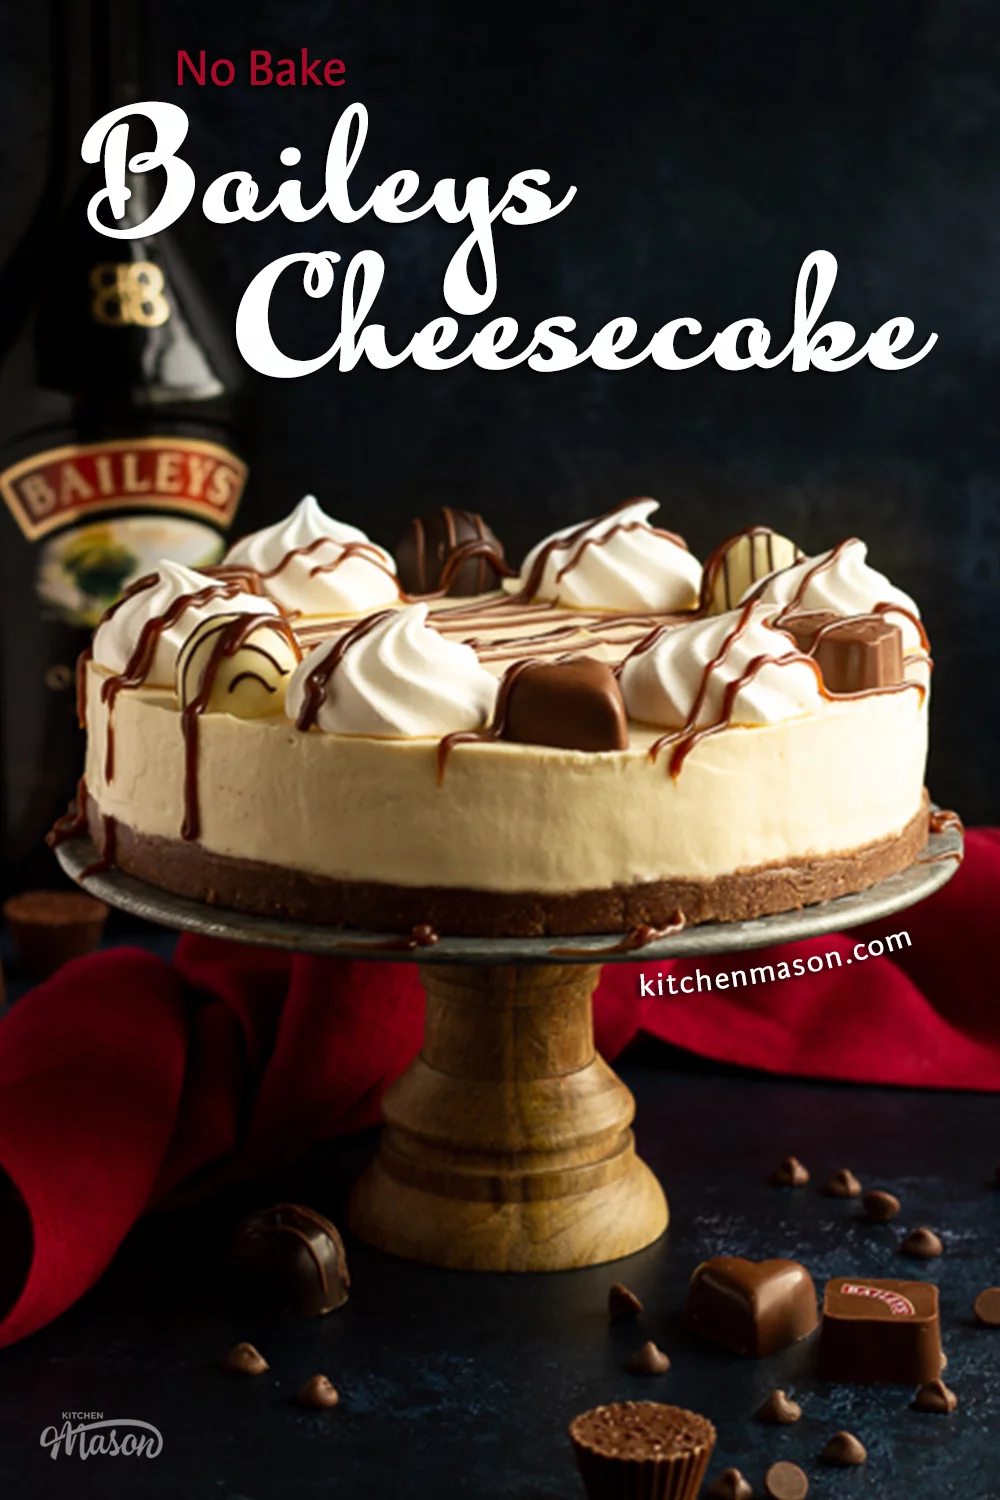 Baileys cheesecake on a cake stand set over a deep blue background with a red linen napkin. A bottle of Baileys sits in the background and Baileys chocolates/chocolate chips are scattered around